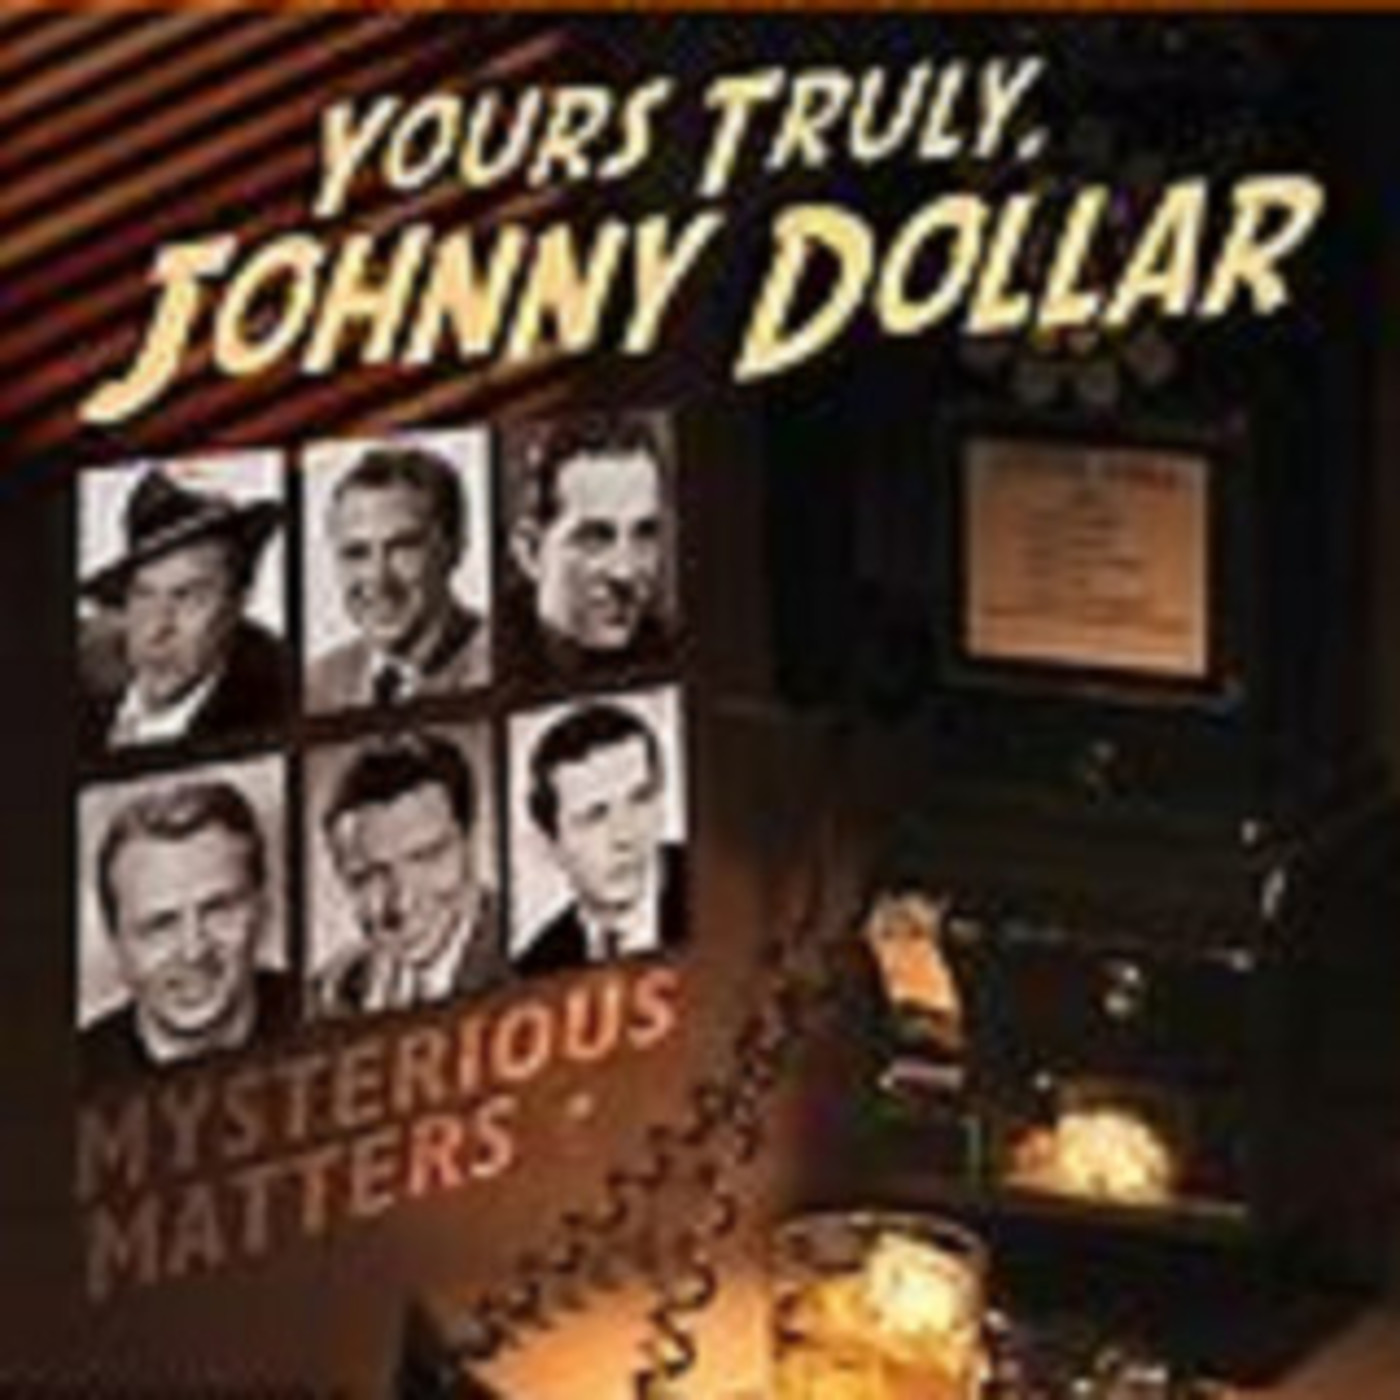 Yours Truly, Johnny Dollar - 042361, episode 737 - The Rat Pack Matter